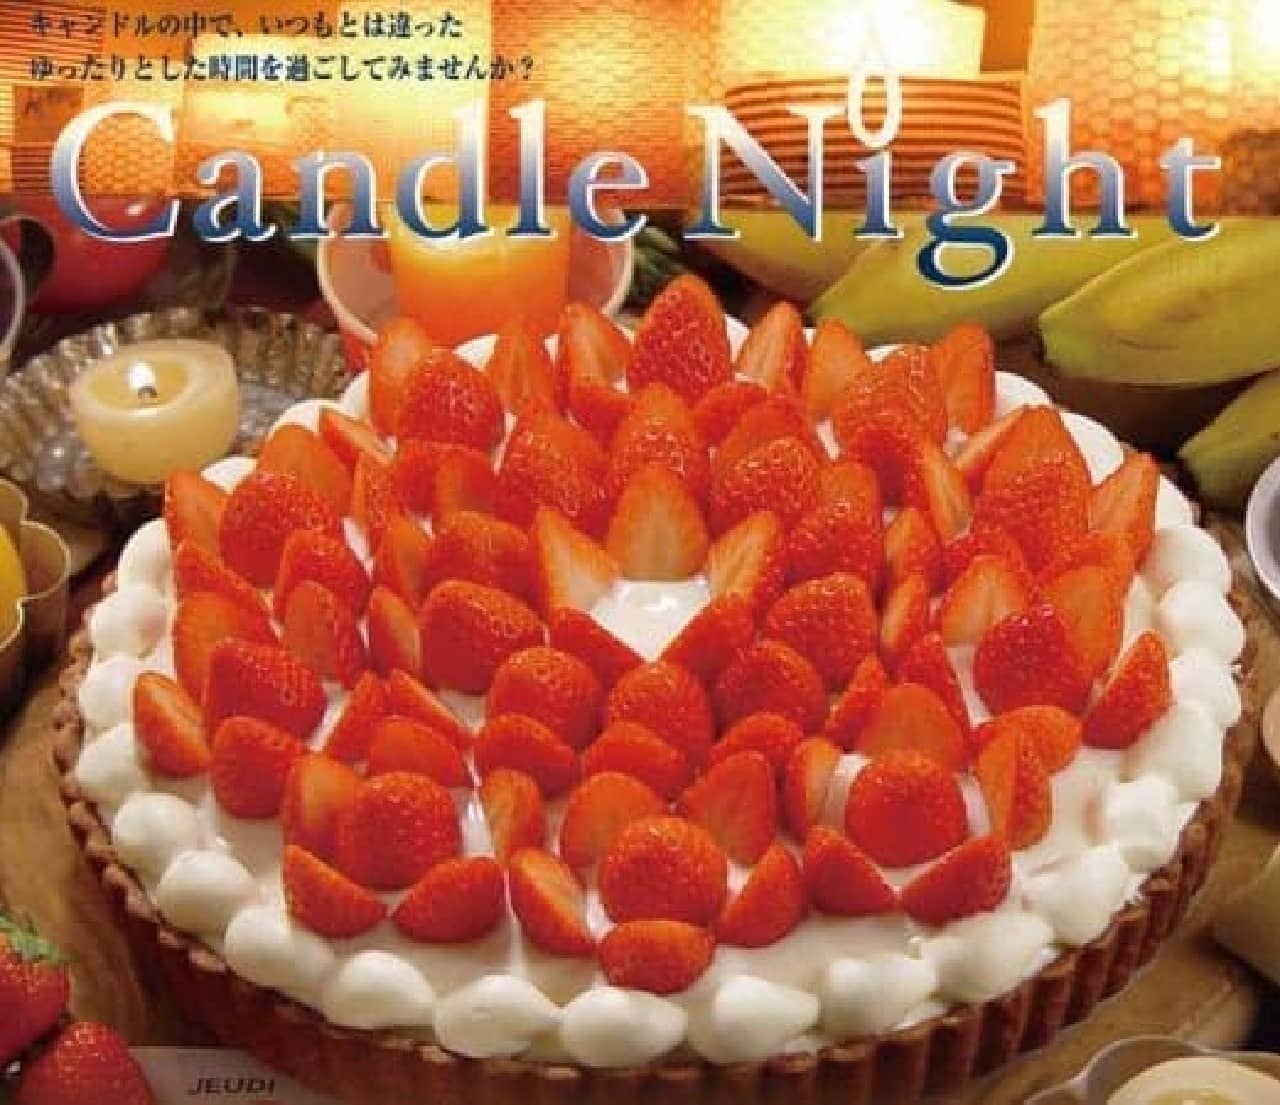 The 20th of every month is Kirfebon "Candle Night Day"